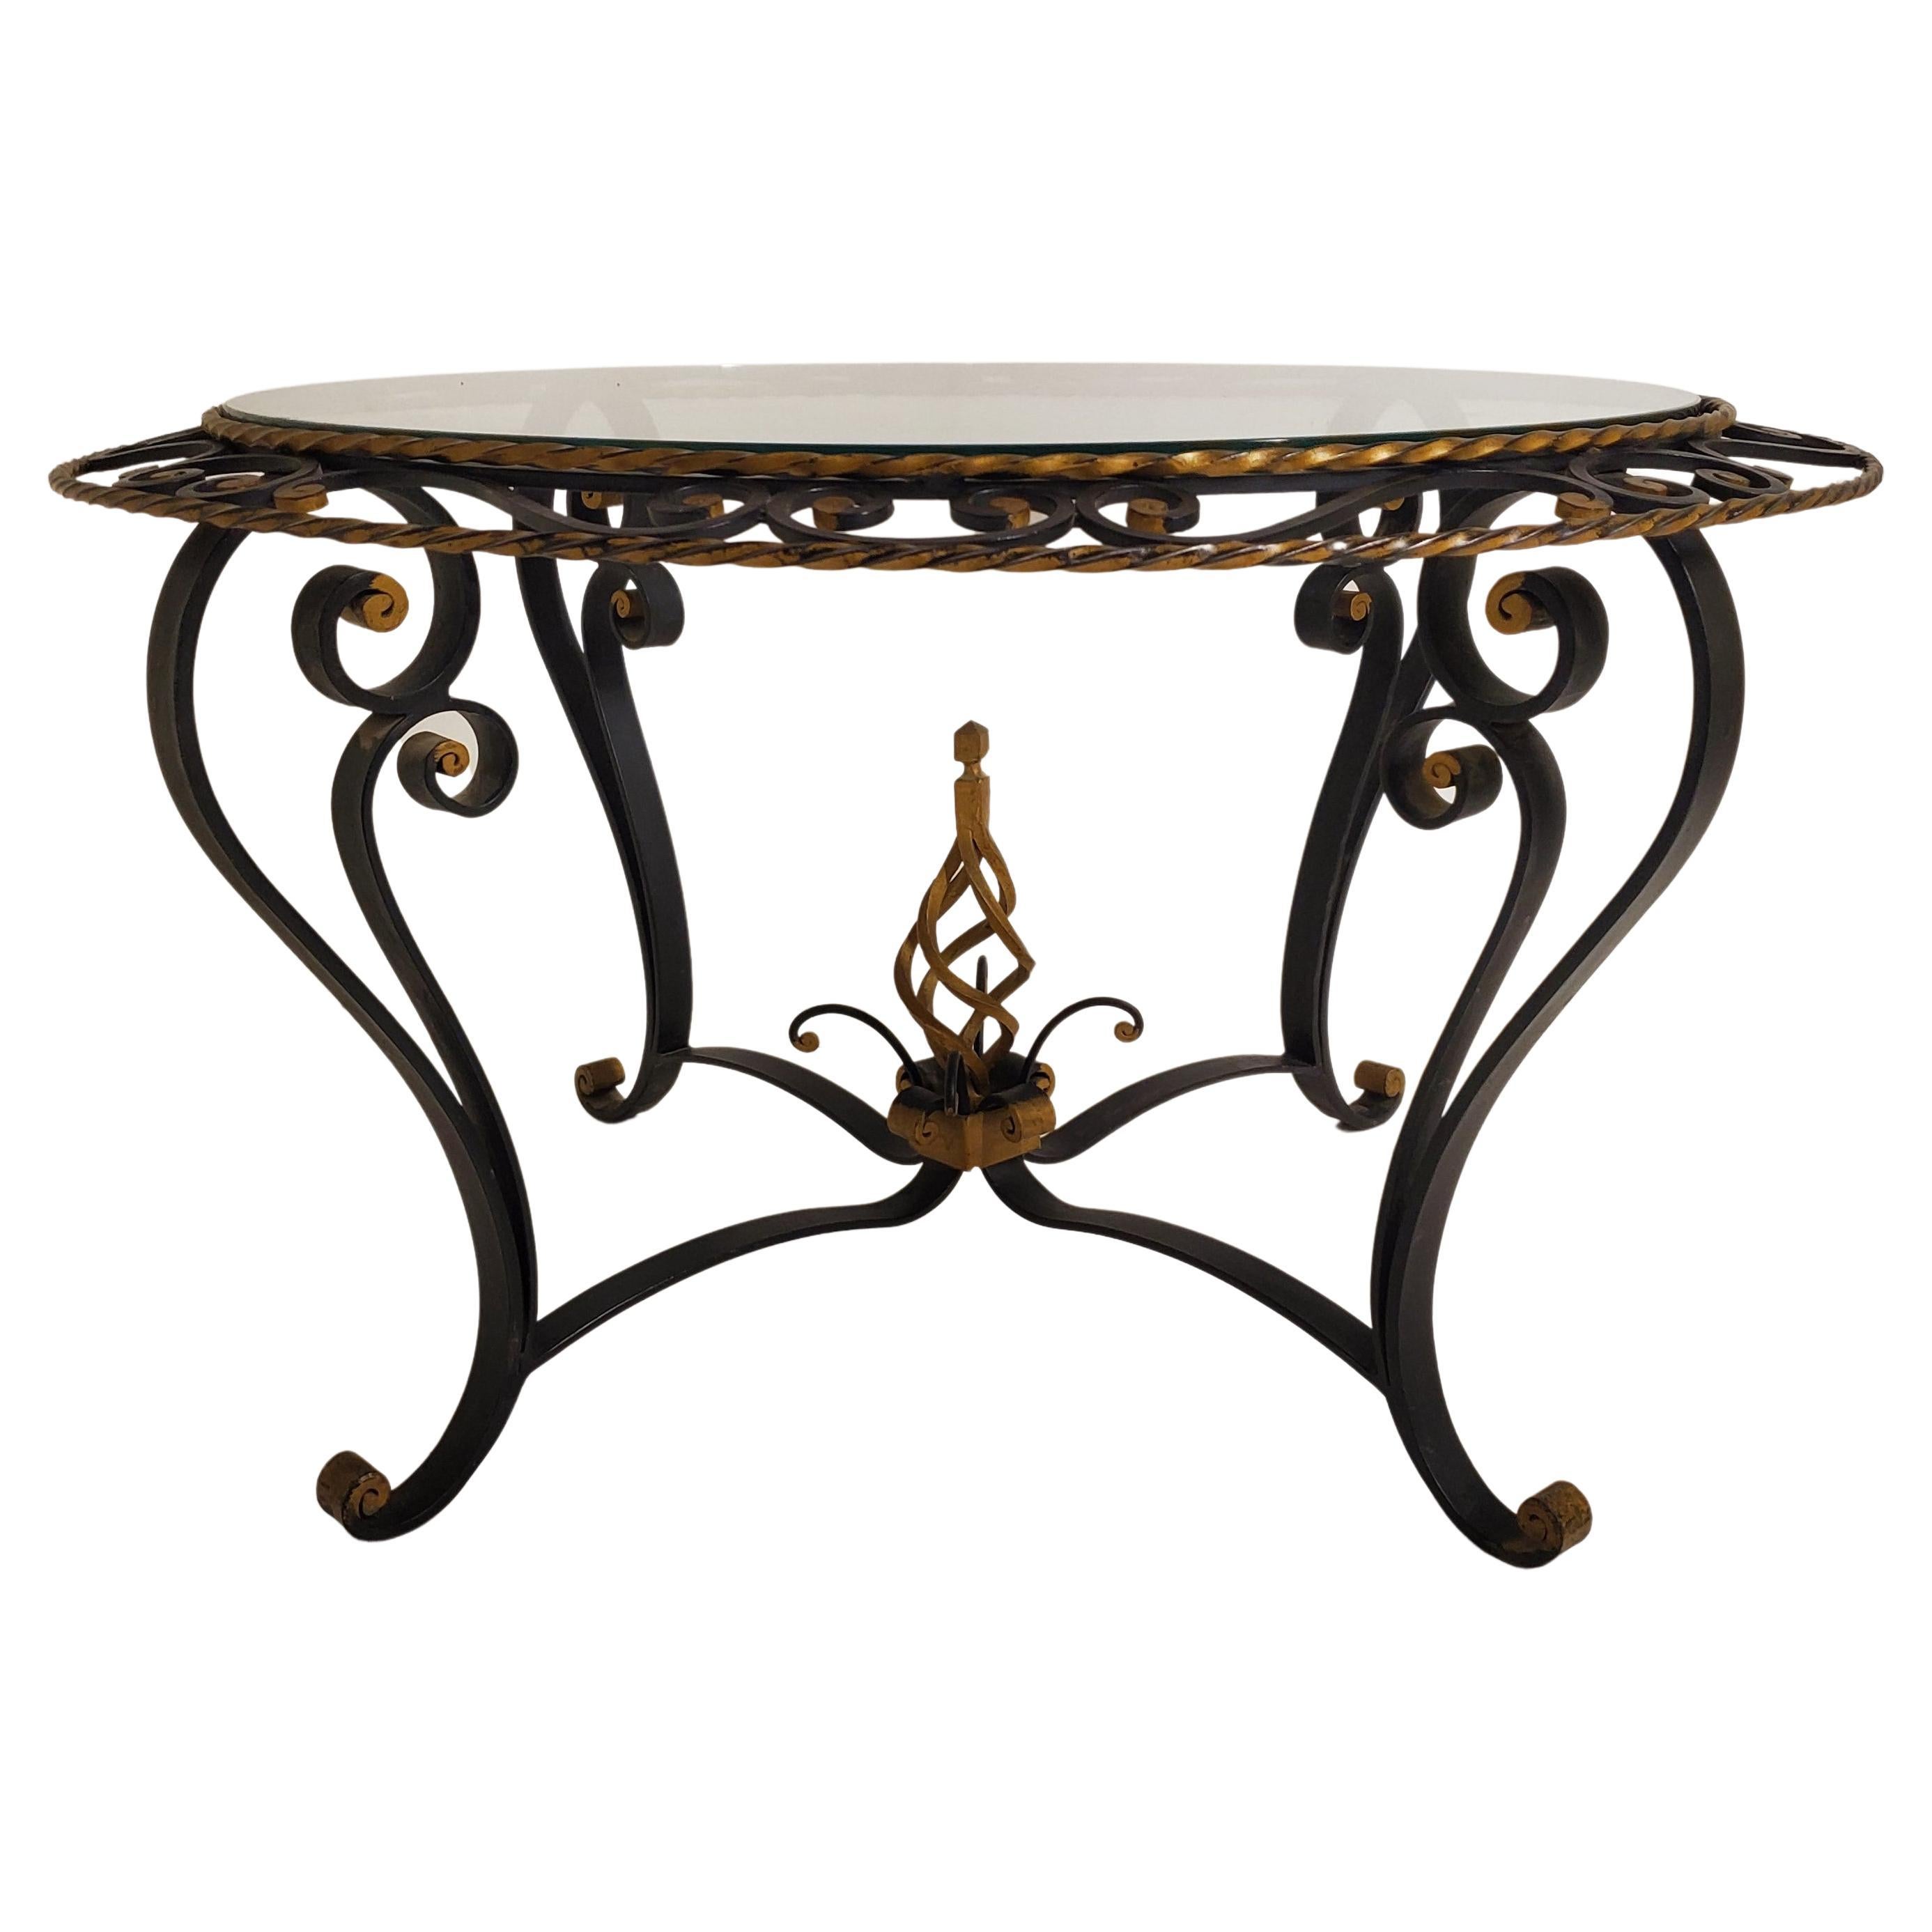 French Wrought Iron Glass Top Coffee / Cocktail Table, Attrib to Poillerat